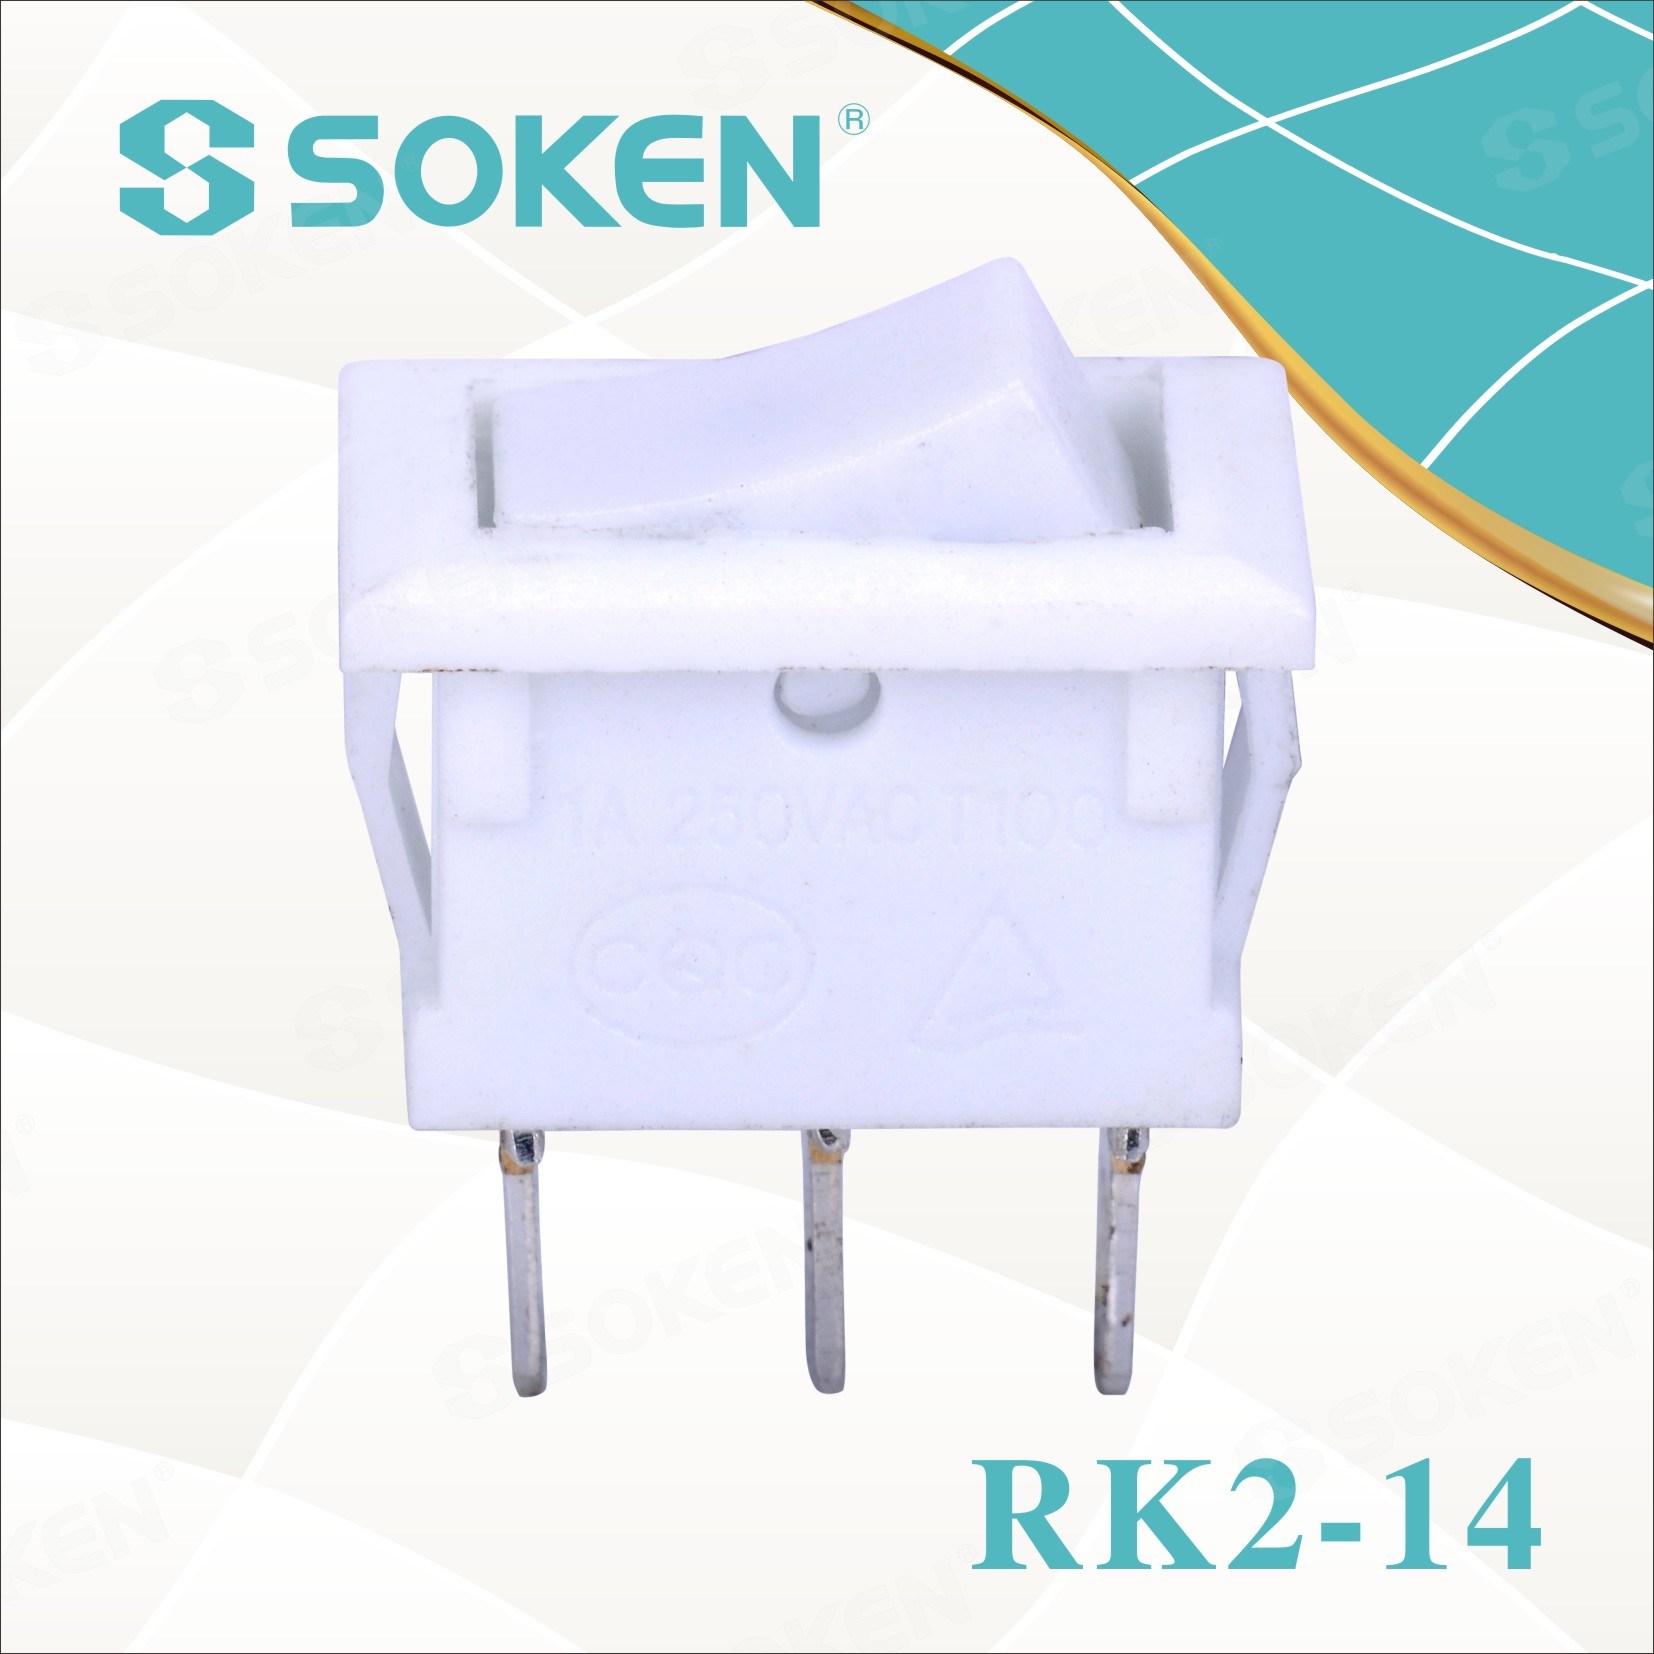 Best Price on Push Button Switch 12v - Soken Rk2-14 1X2 Electric Rocker Switch – Master Soken Electrical detail pictures